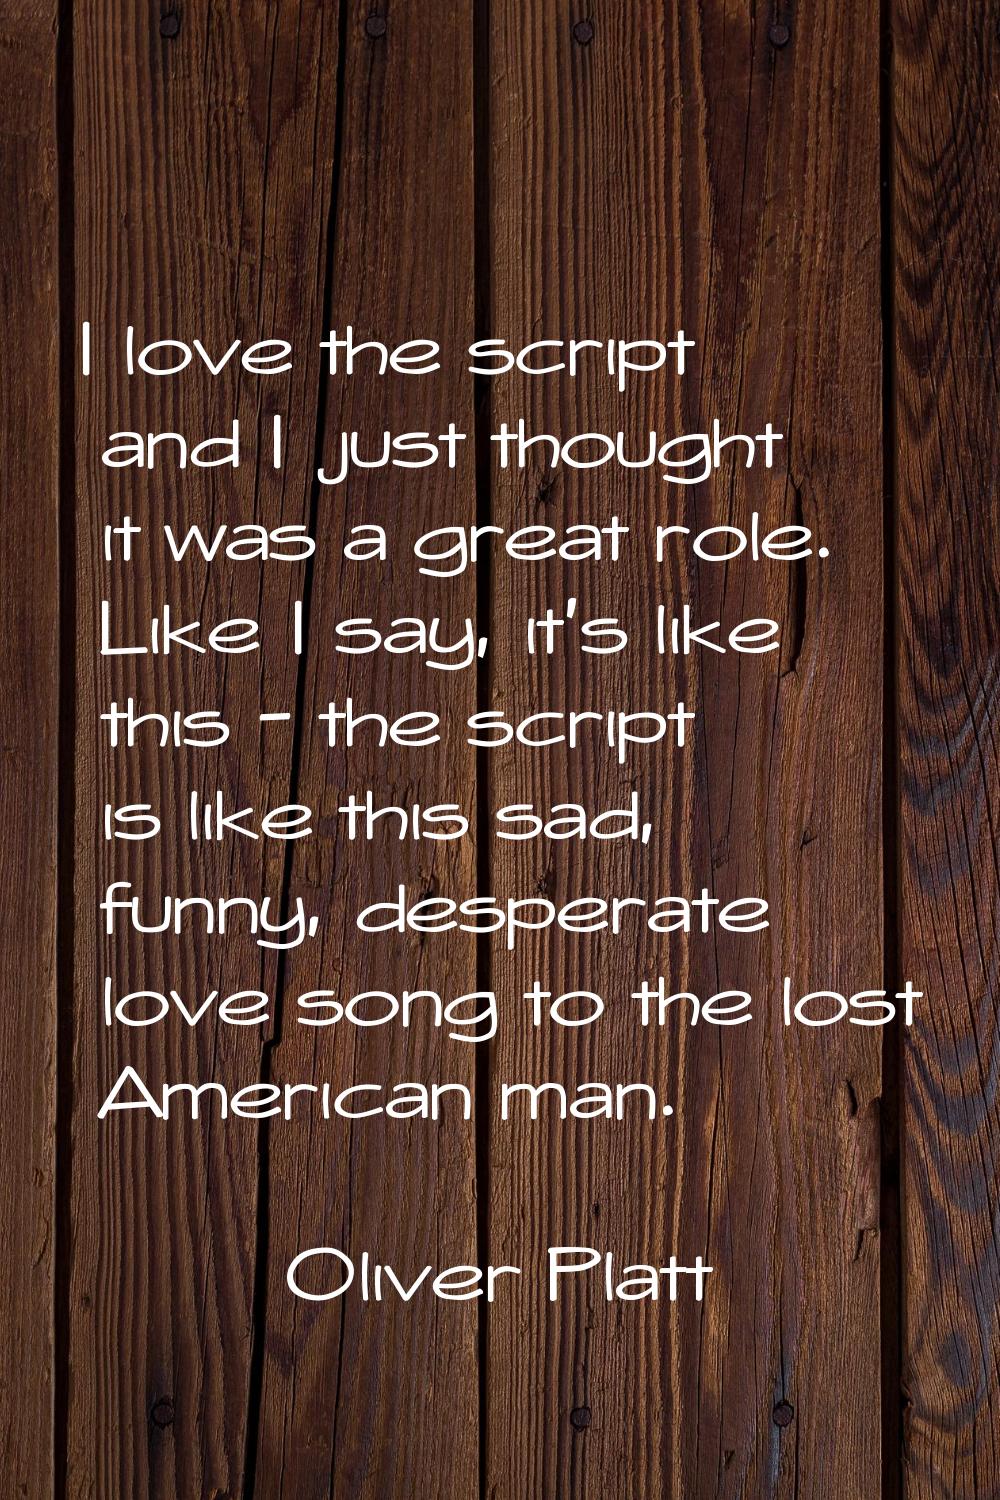 I love the script and I just thought it was a great role. Like I say, it's like this - the script i